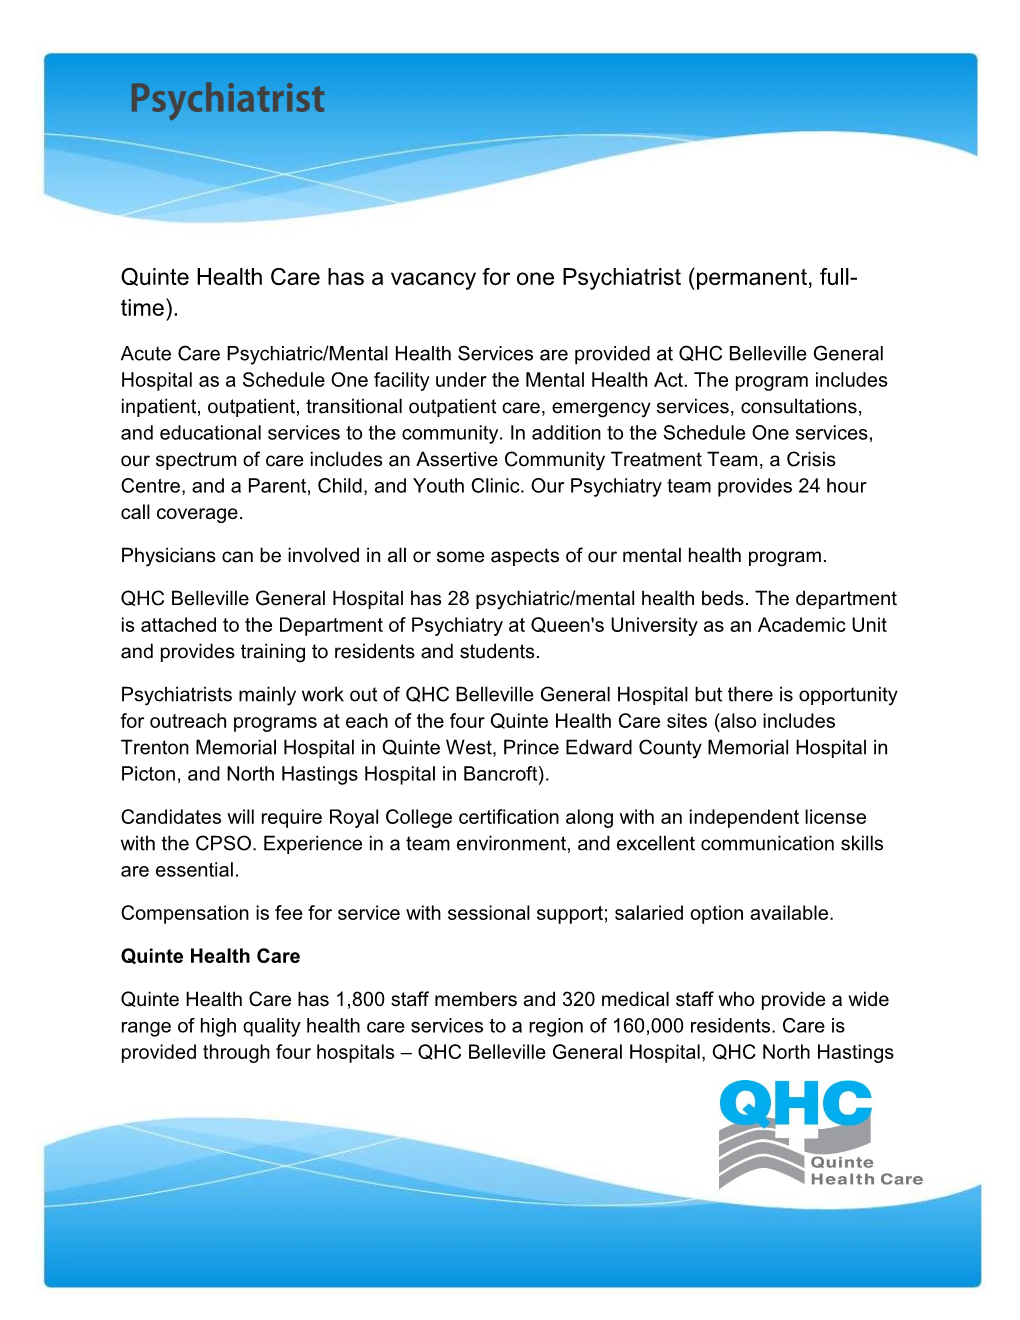 Quinte Health Care Has a Vacancy for One Psychiatrist (Permanent, Full- Time)